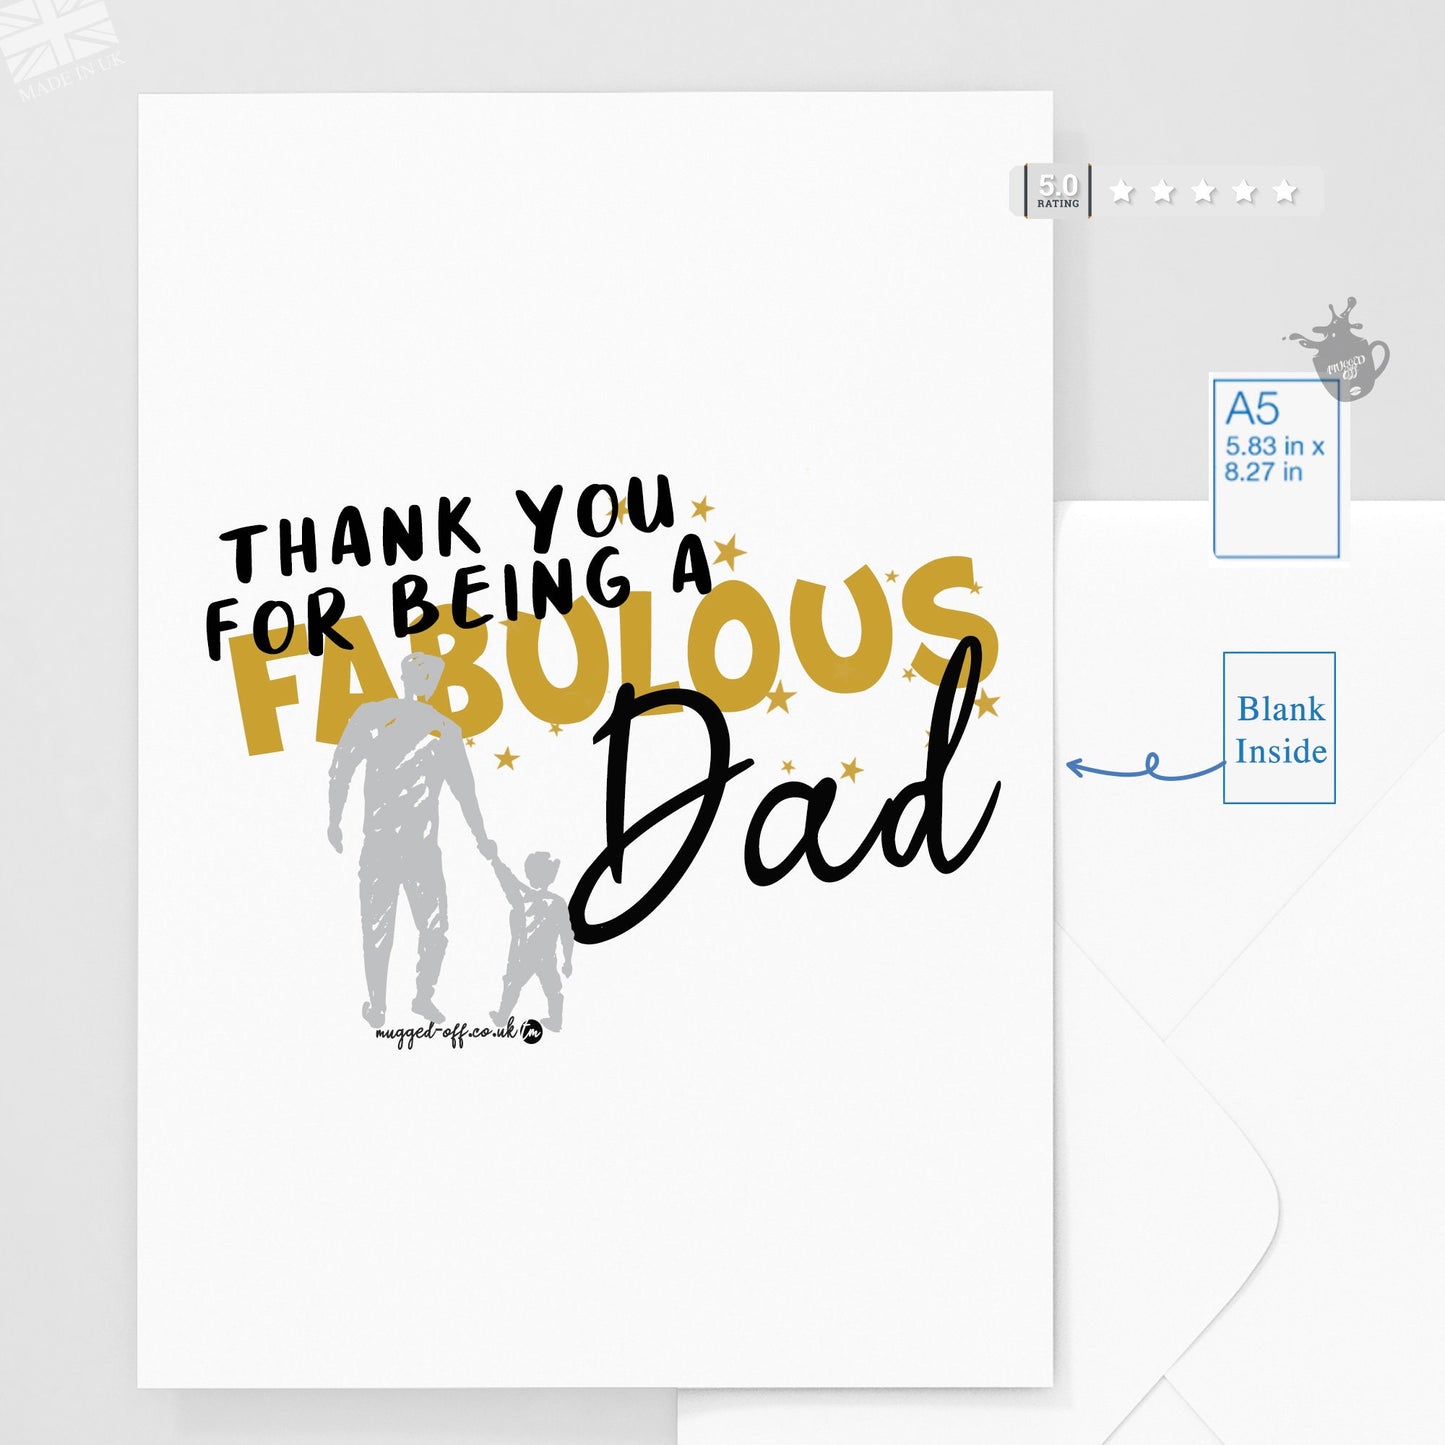 Dad Birthday card, Fathers day Card /thank you dad card. A wonderful card for the perfect Dad carefully crafted just for you.